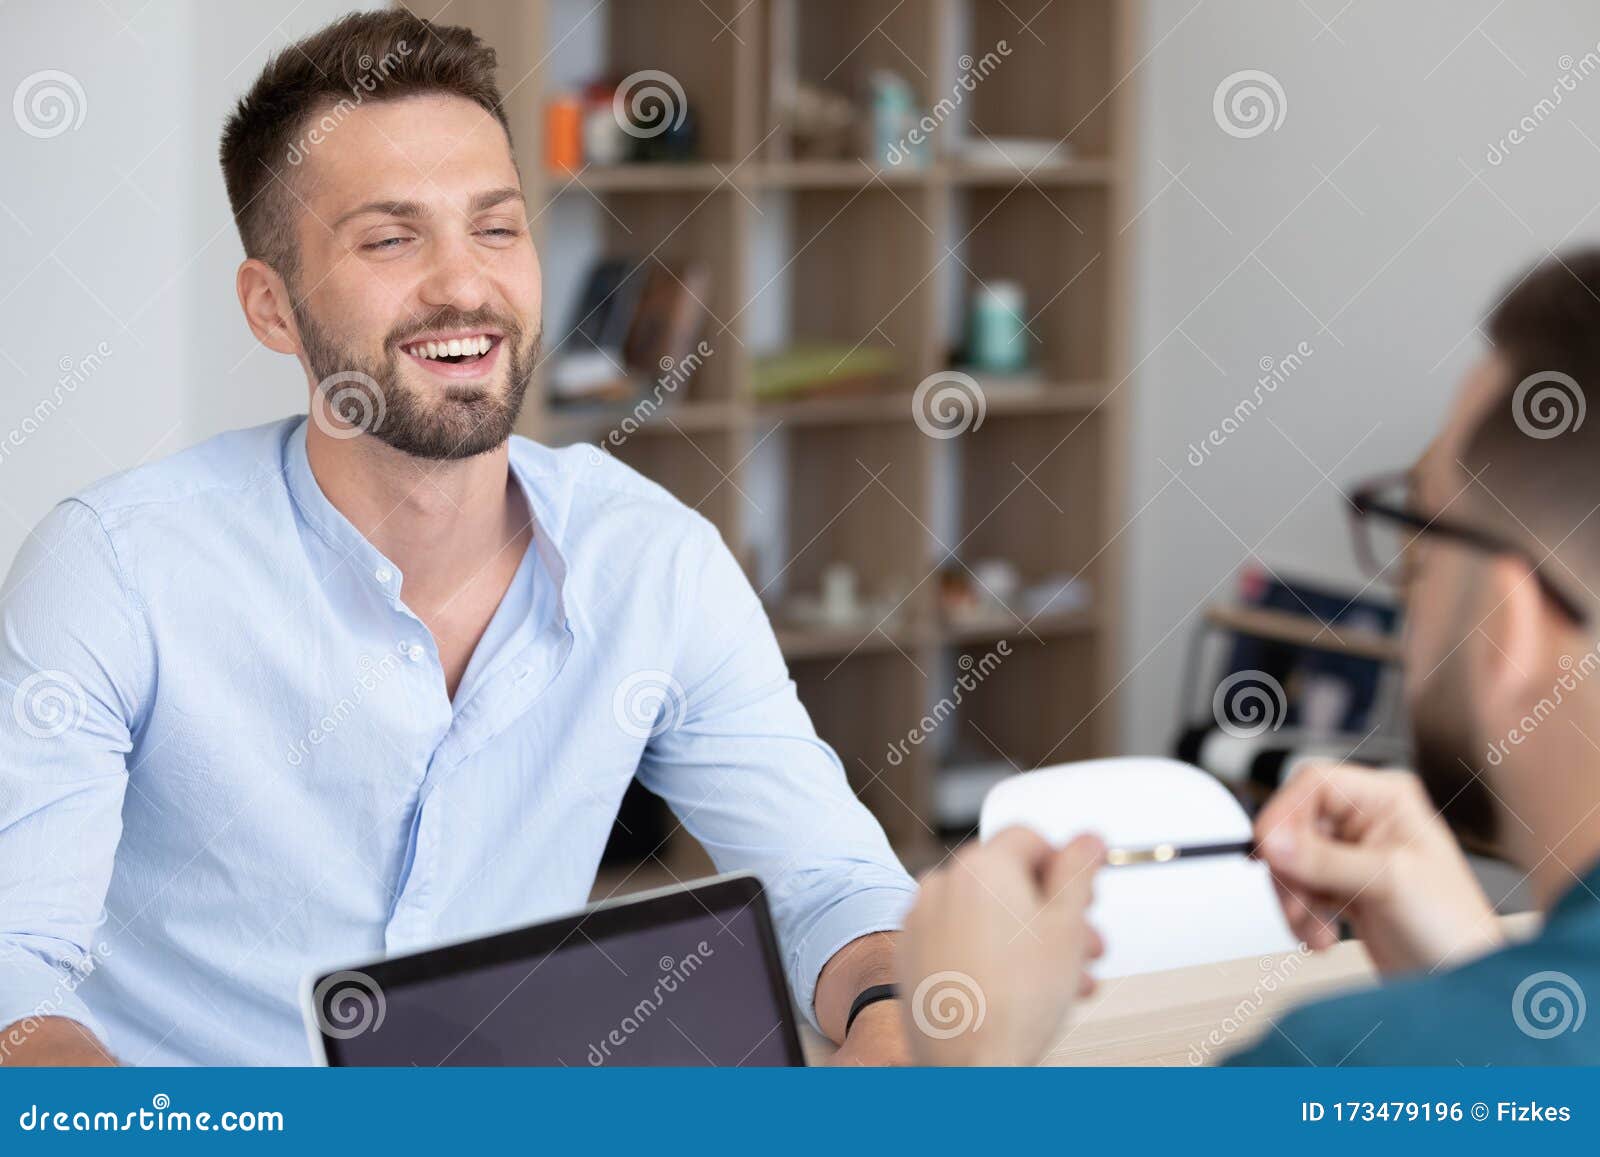 young smiling man attending job interview with skilled hr manager.